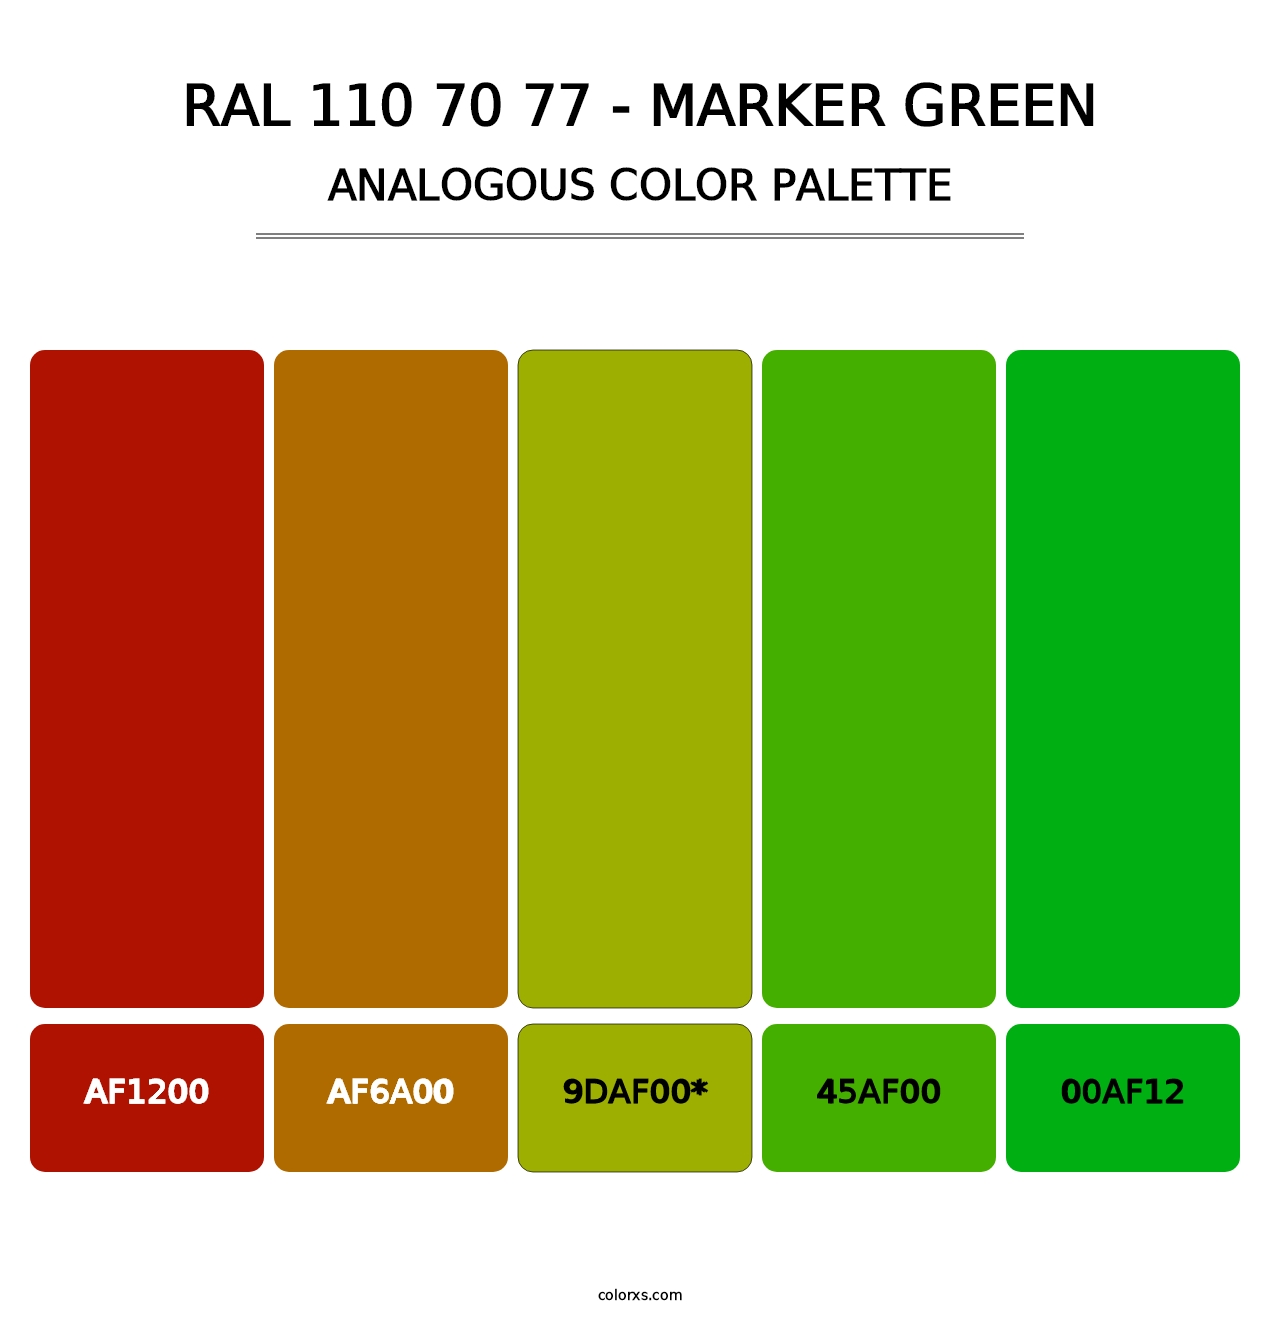 RAL 110 70 77 - Marker Green - Analogous Color Palette